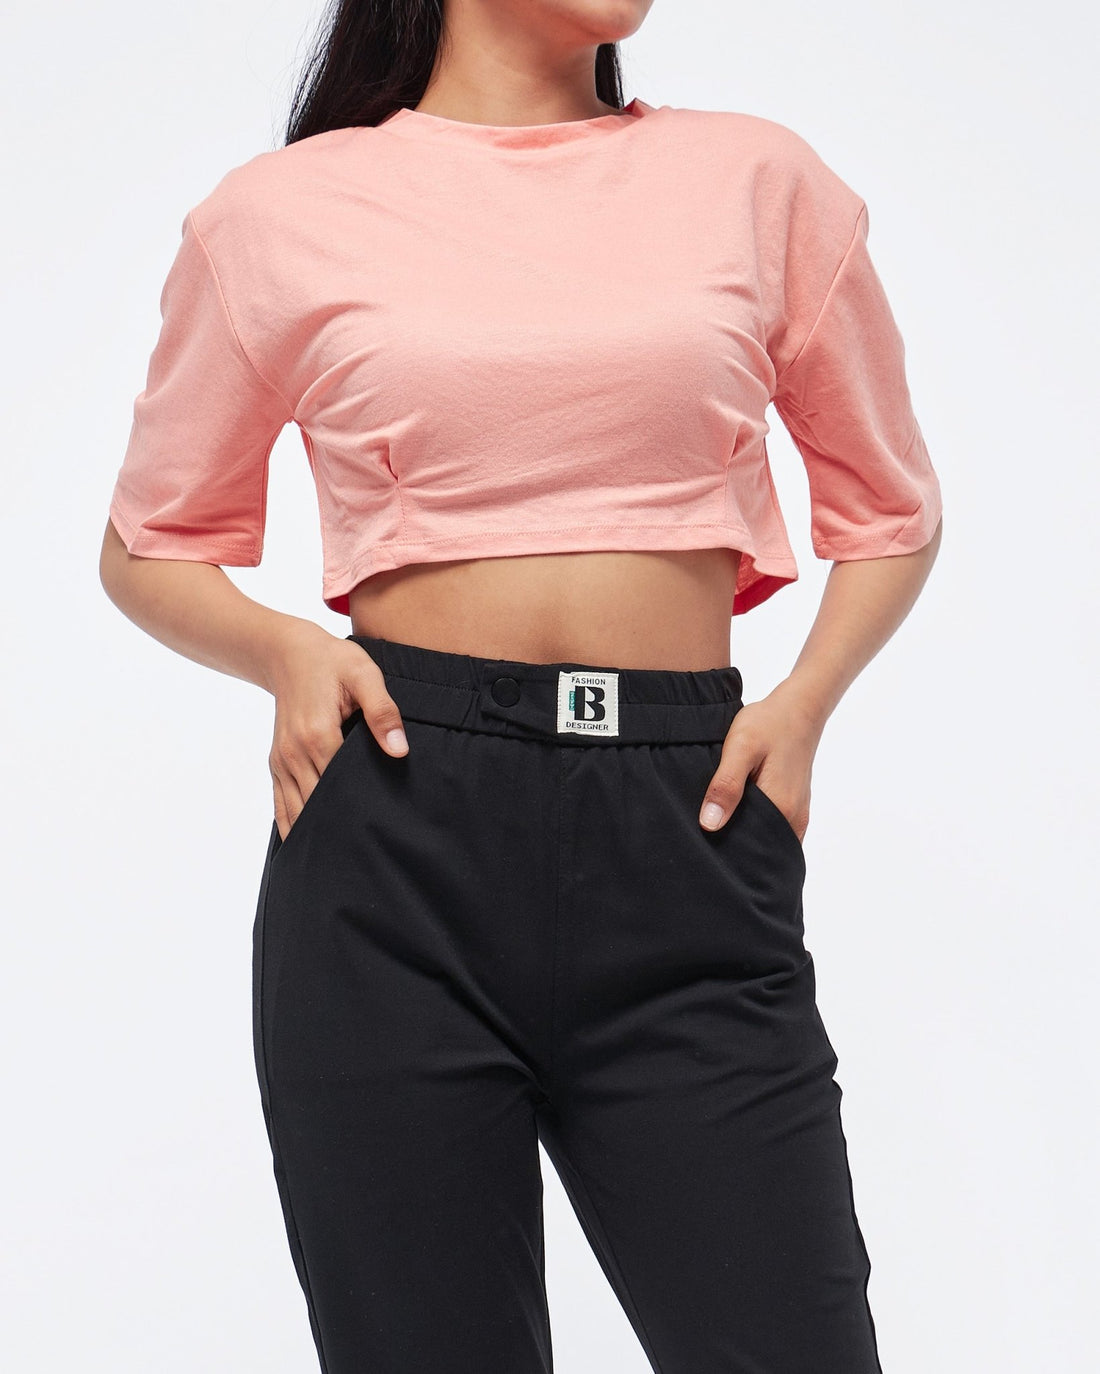 MOI OUTFIT-Candy Color Lady Crop Top 11.90